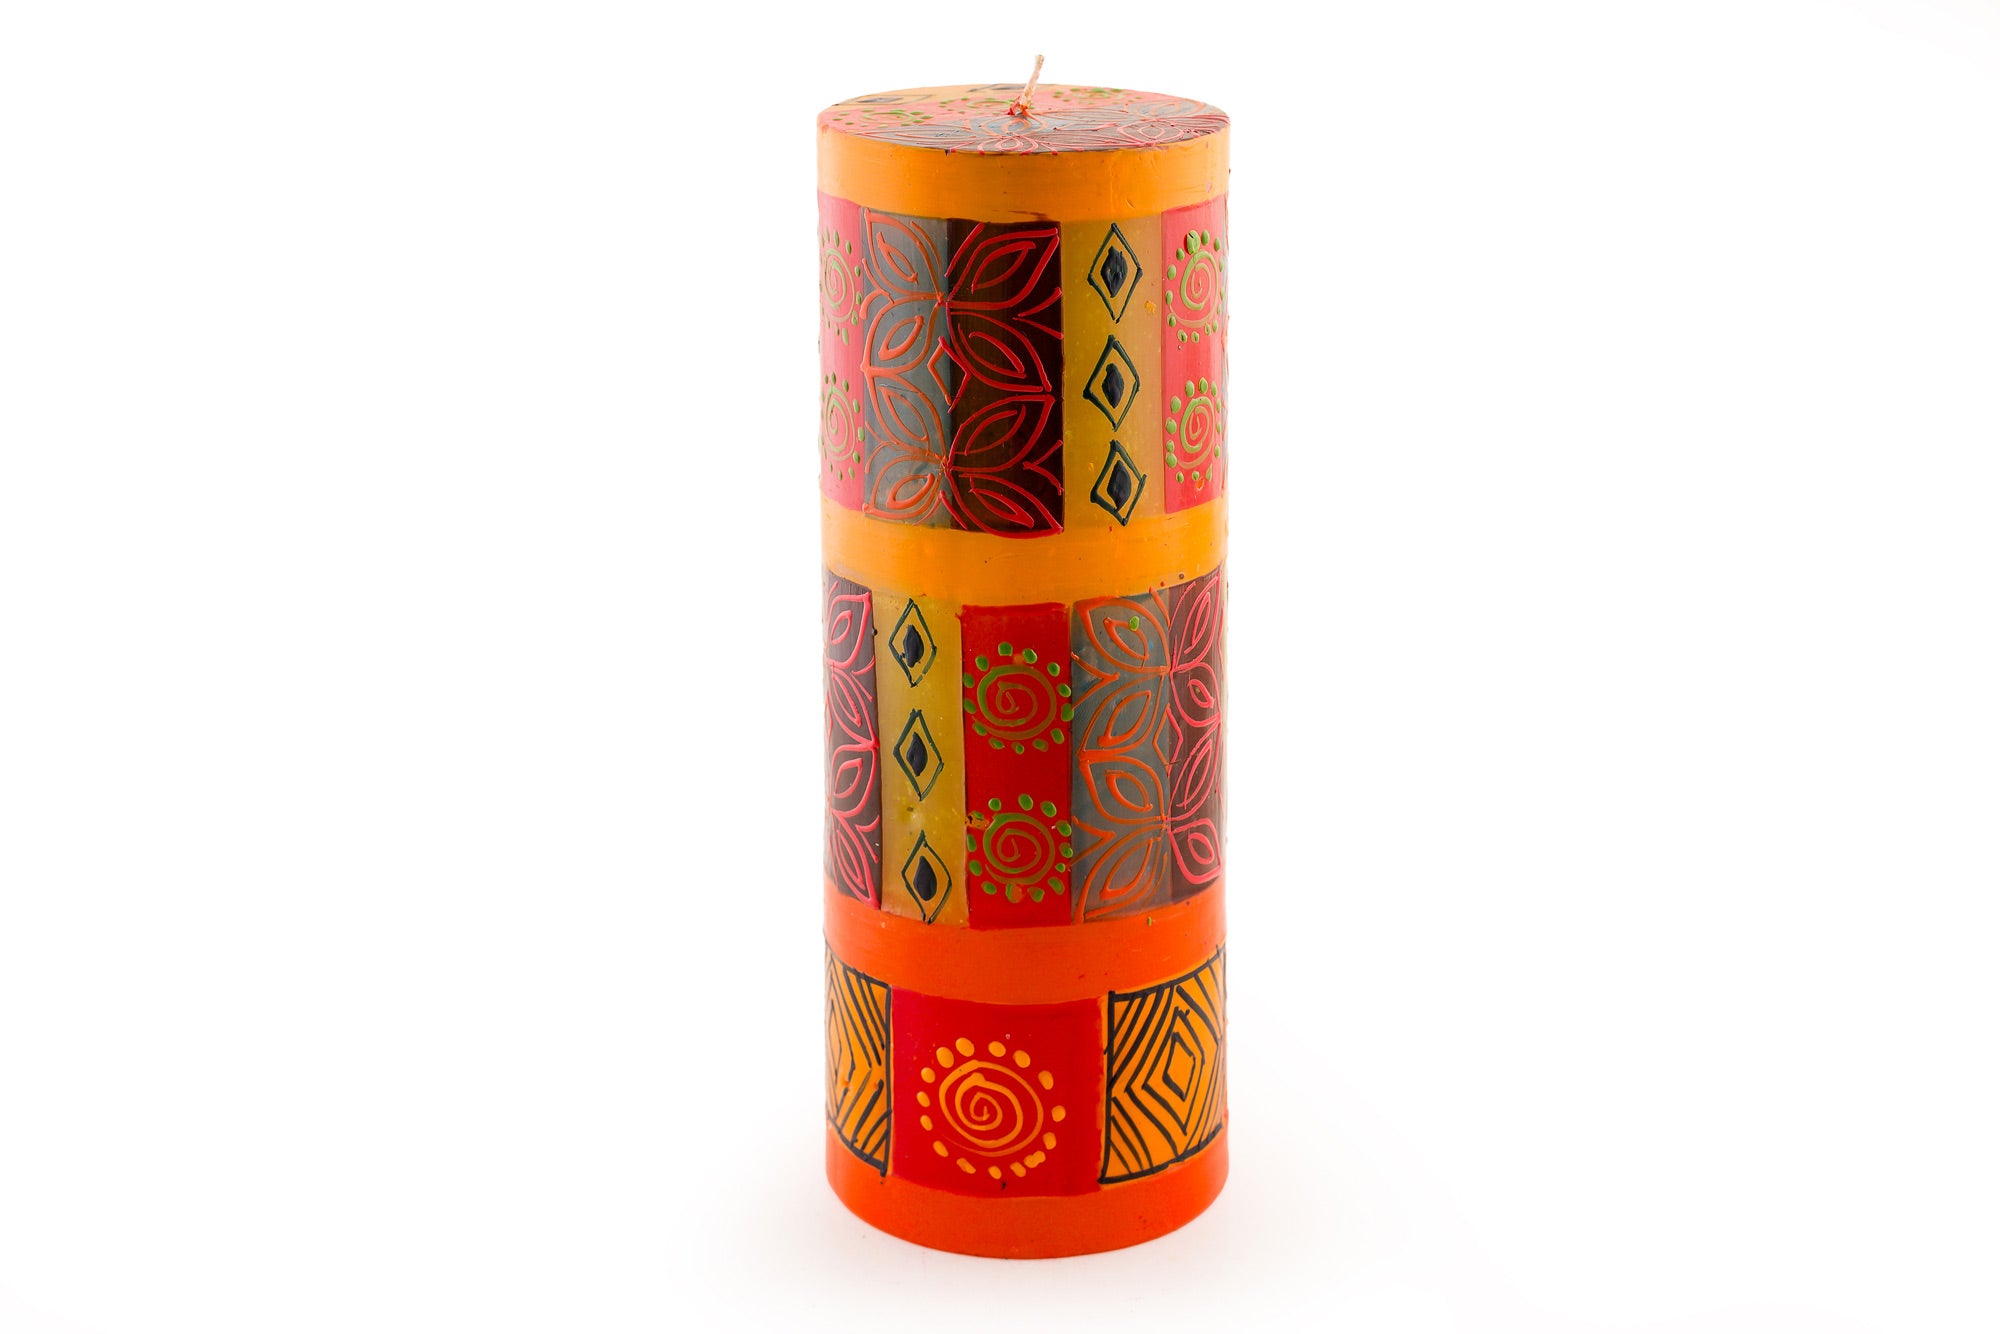 Desert Rose 3x8 pillar candle. Beautiful colors of the African desert; golden yellow, turquoise blue, browns, orange painted in blocks of color with abstract patterns on top.